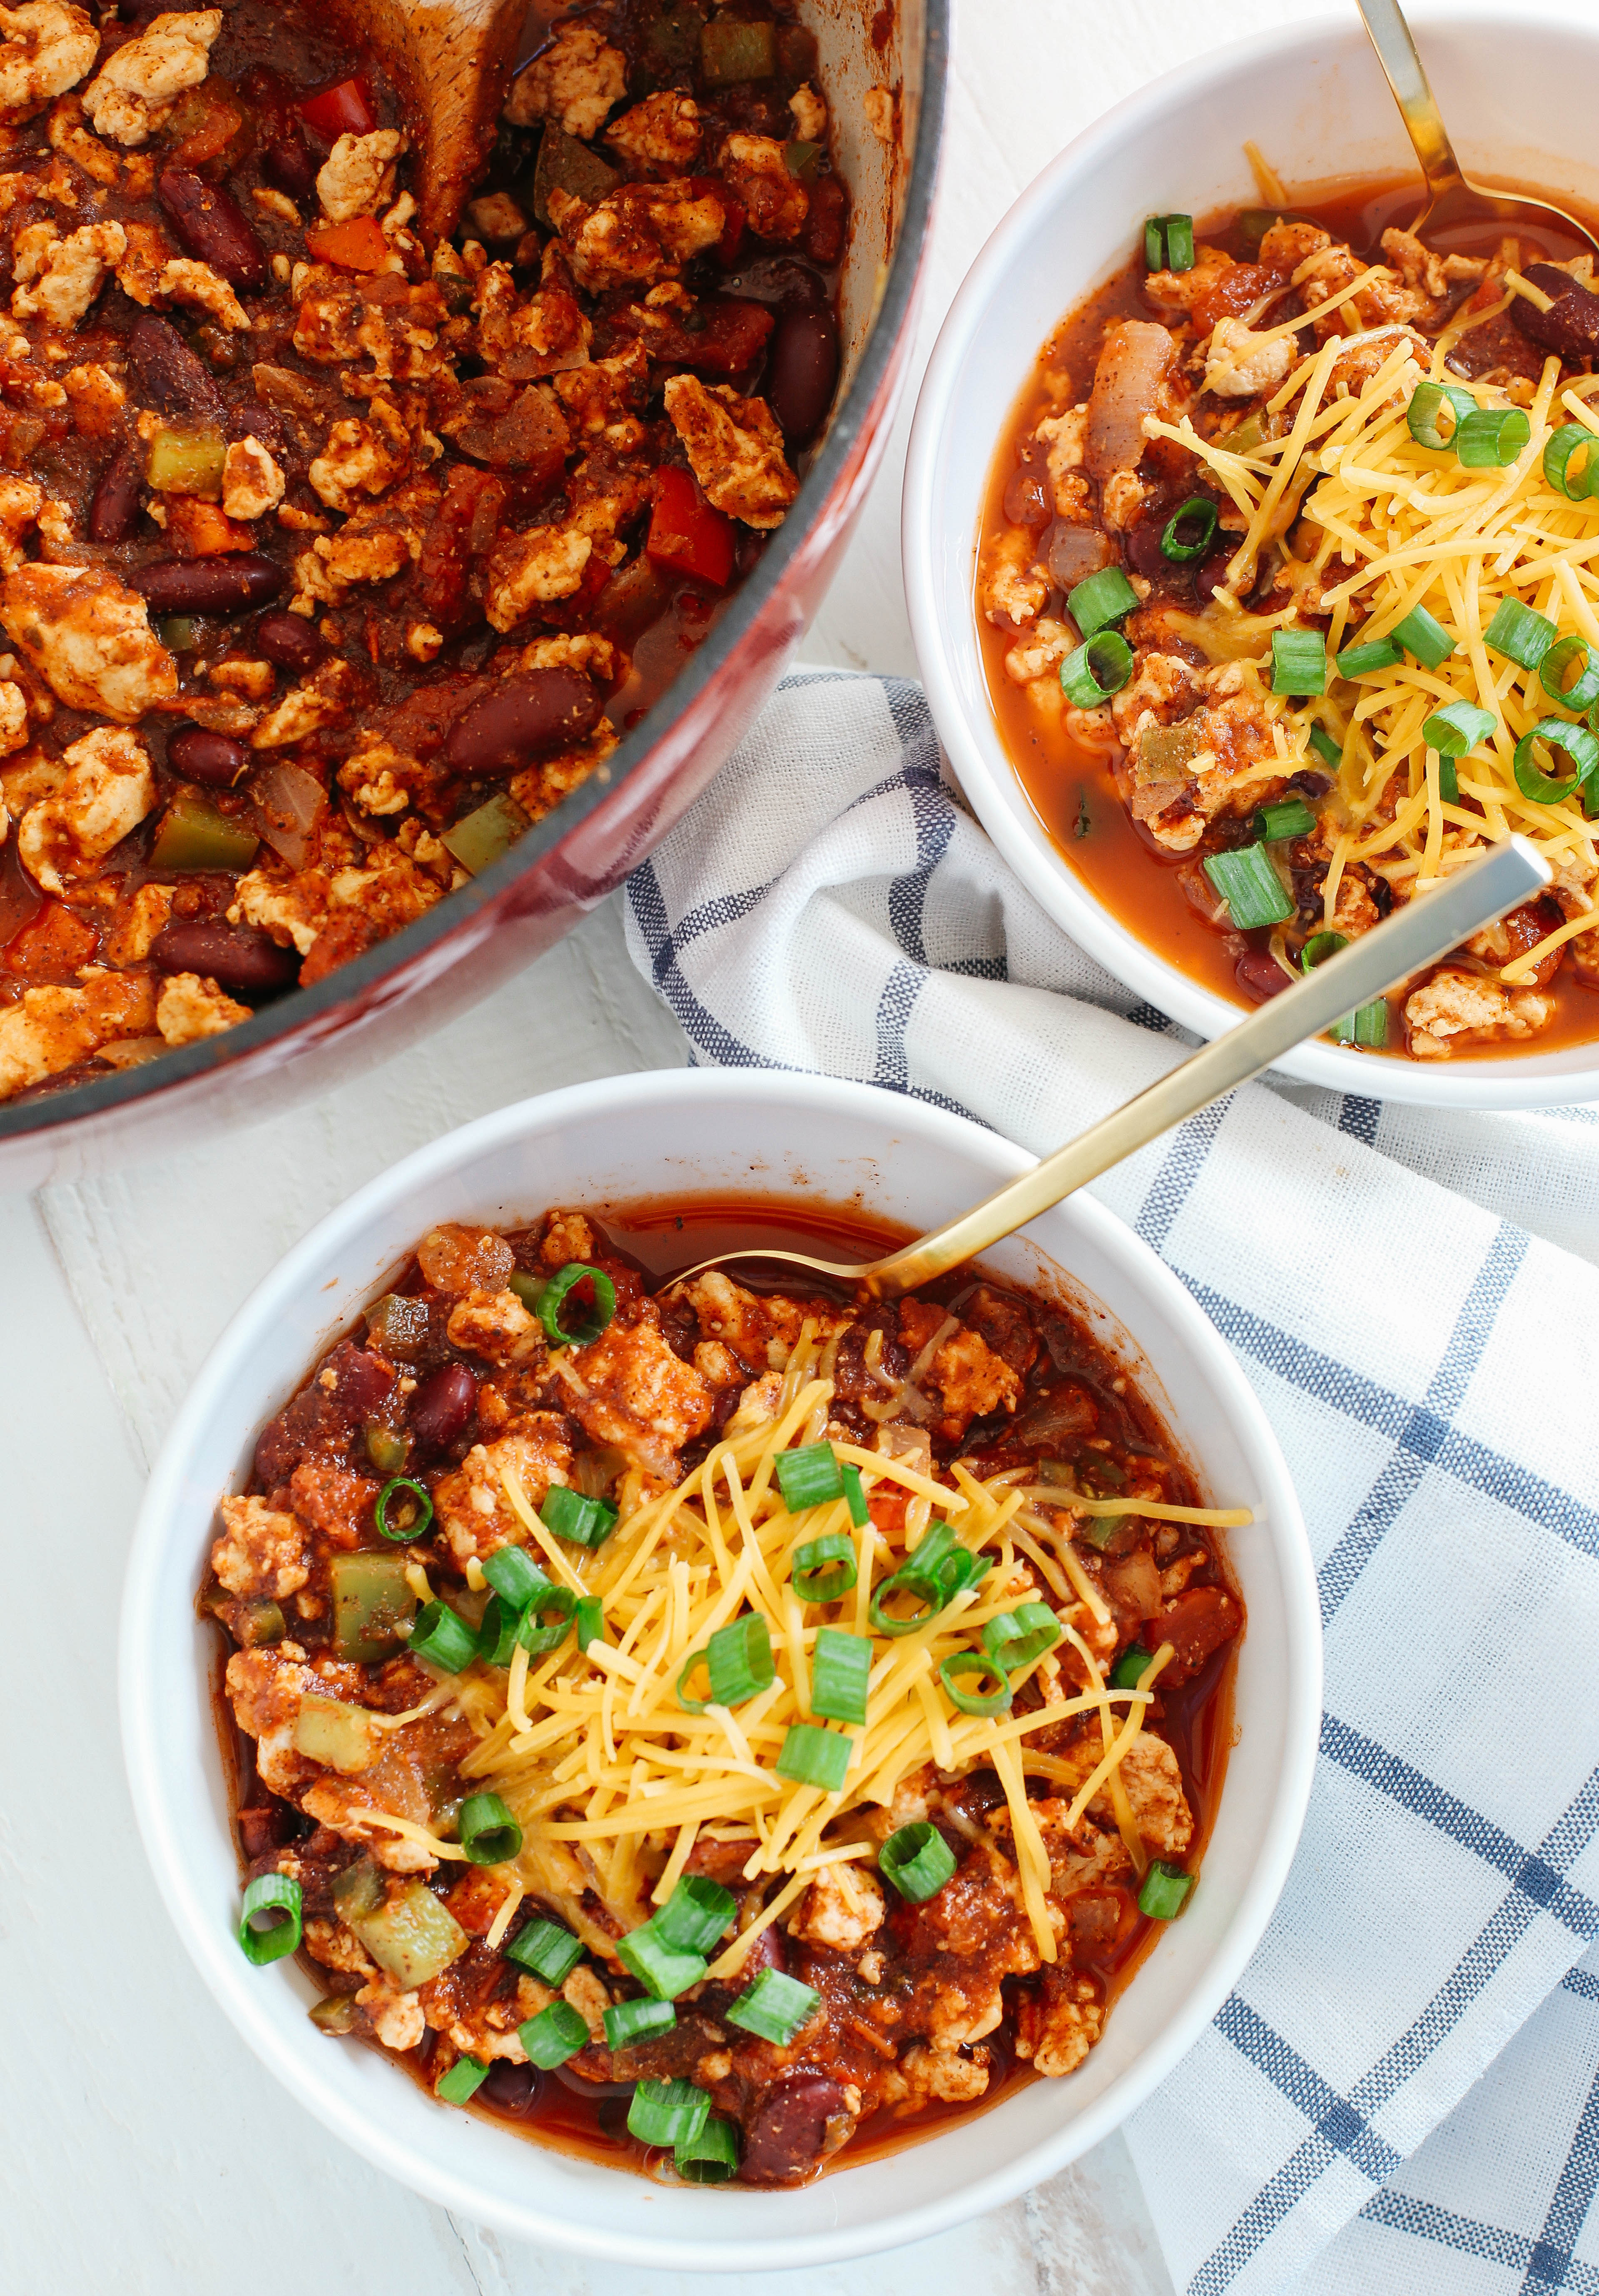 The BEST Turkey Chili recipe full of fresh veggies, lean turkey and tons of delicious flavor! Perfect for tailgates, meal prep and weekly dinners!